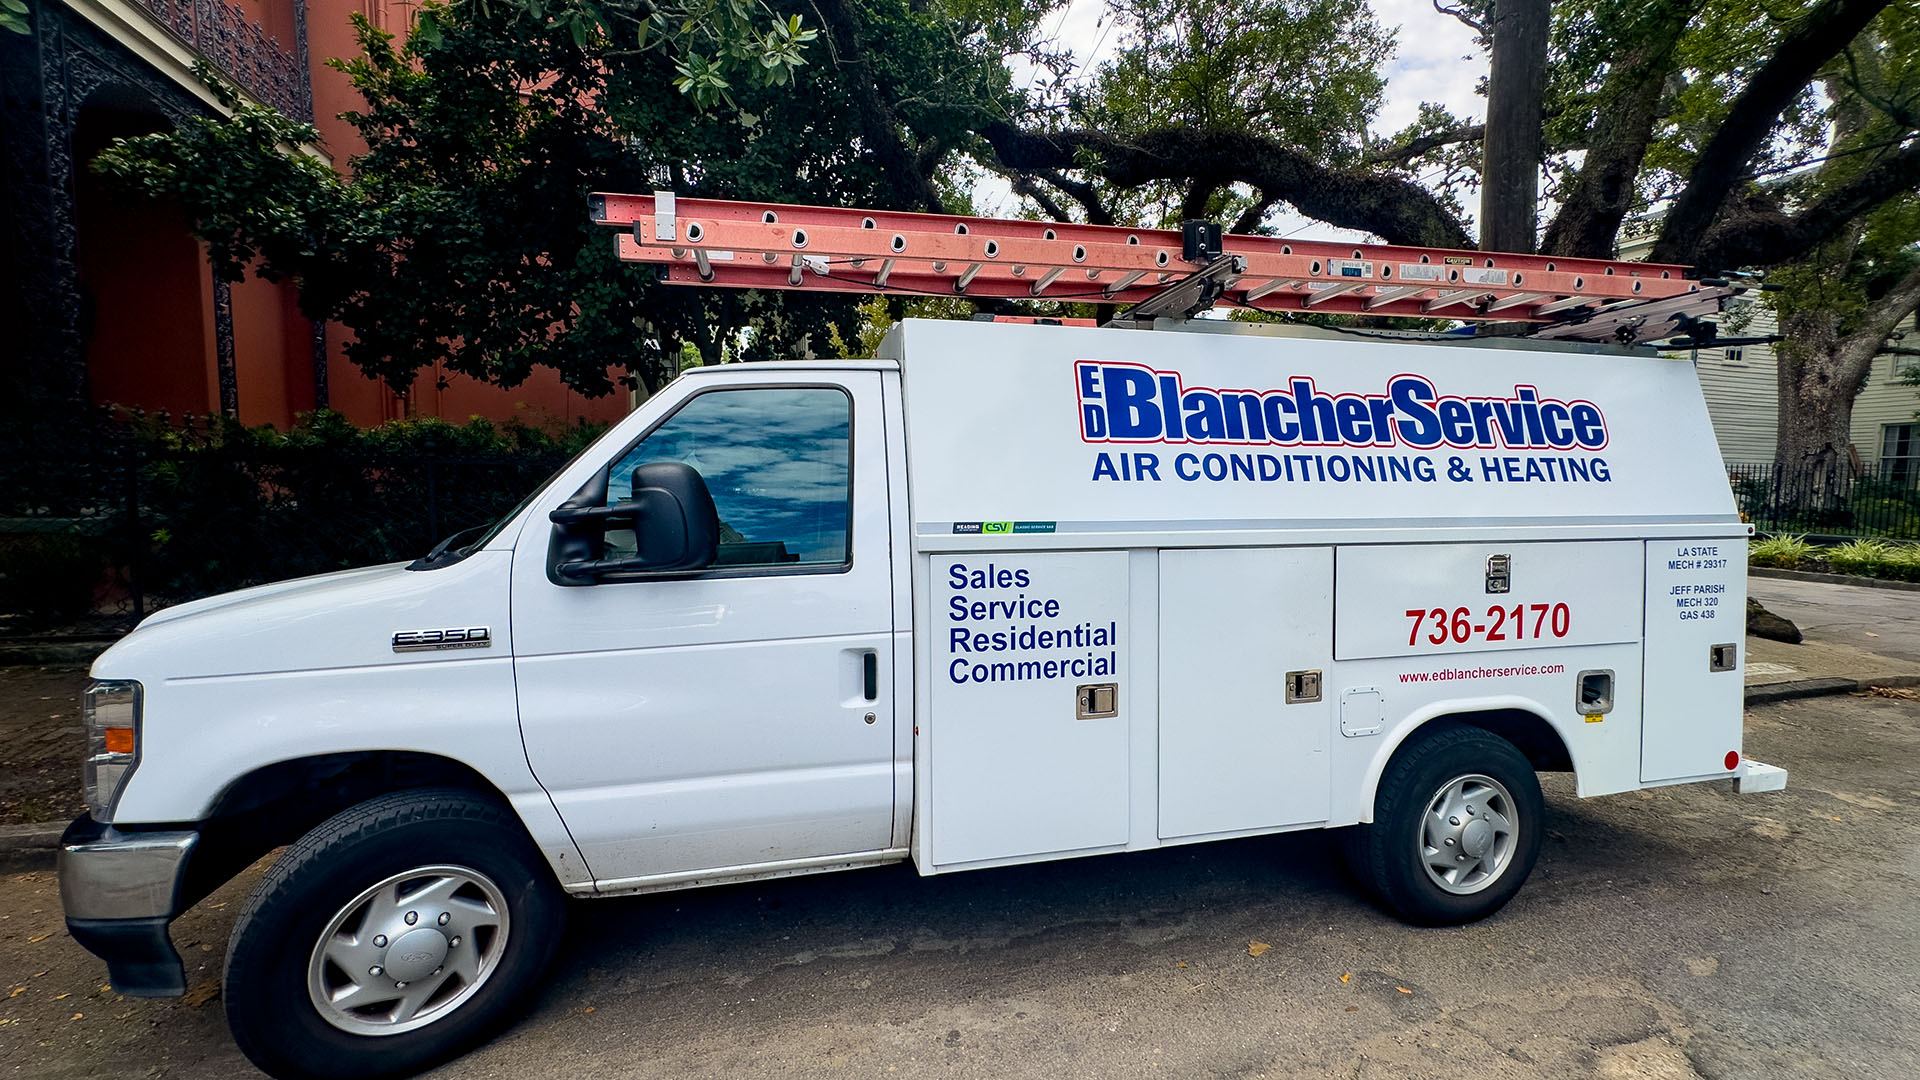 Ed Blancher Air Condition Service